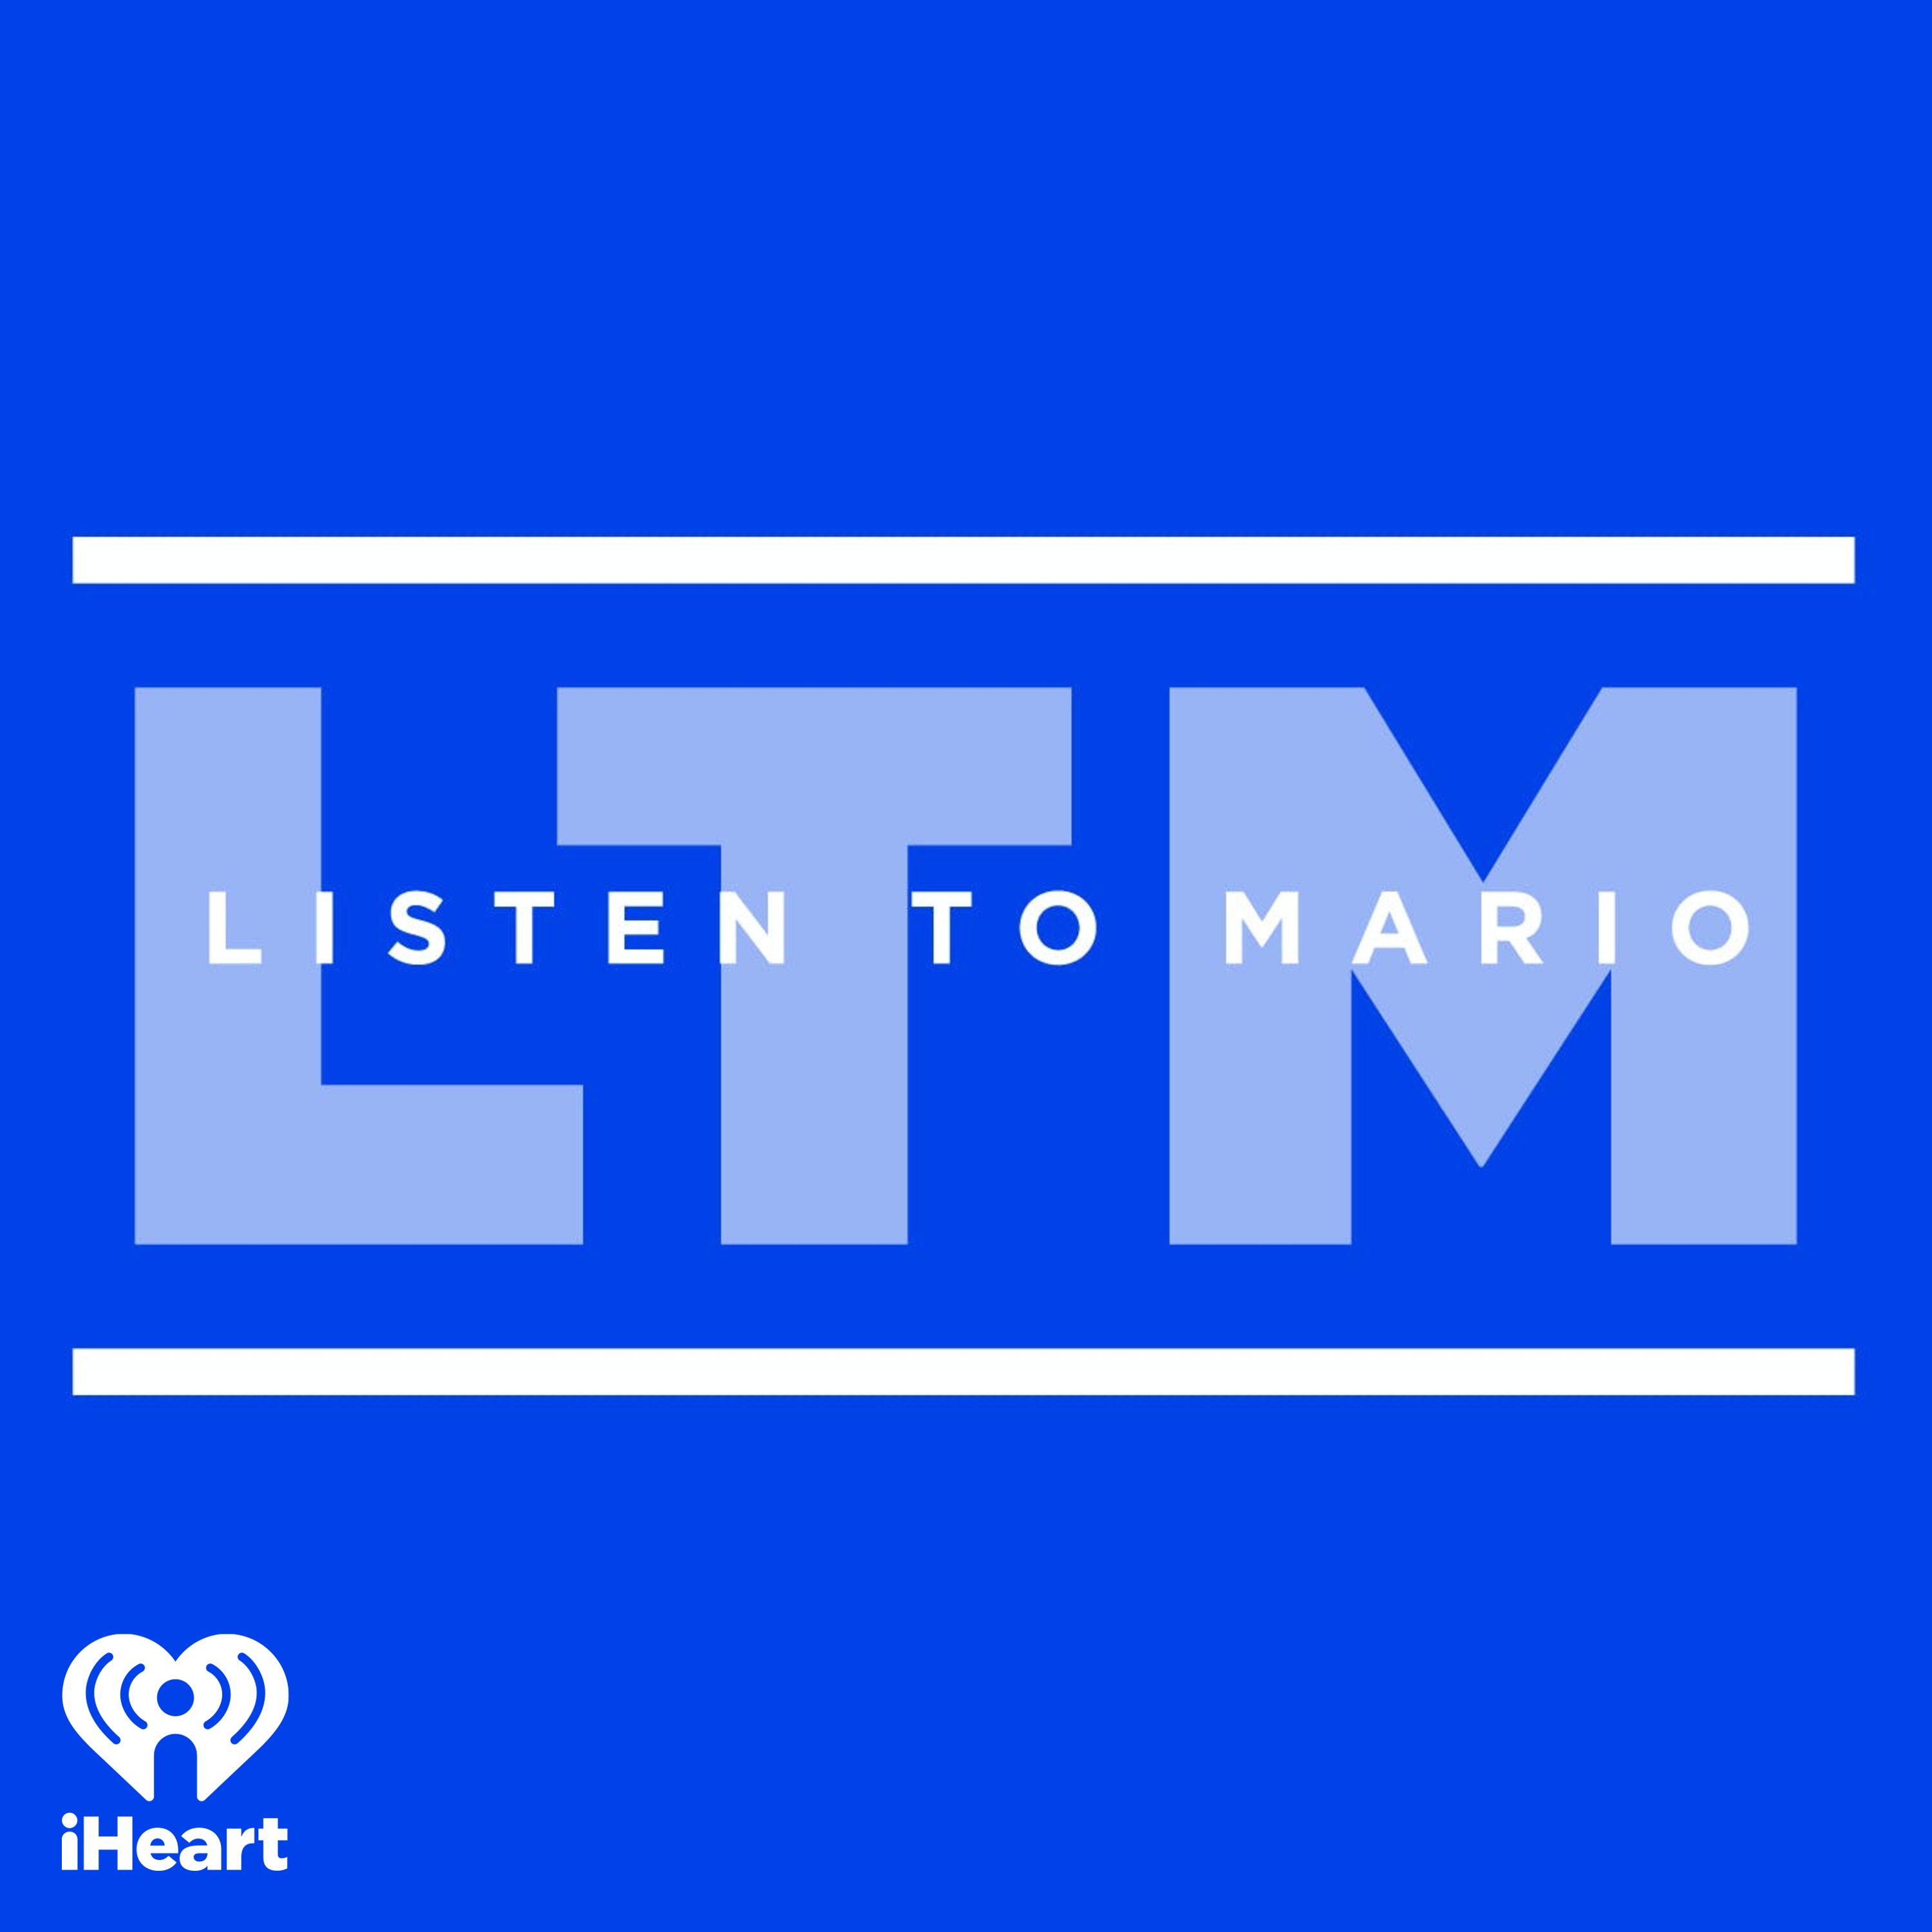 Listen To Mario get the scoop on actress Kate Del Castillo meeting infamous Drug Lord El Chapo, getting the rights to his life story, and more!